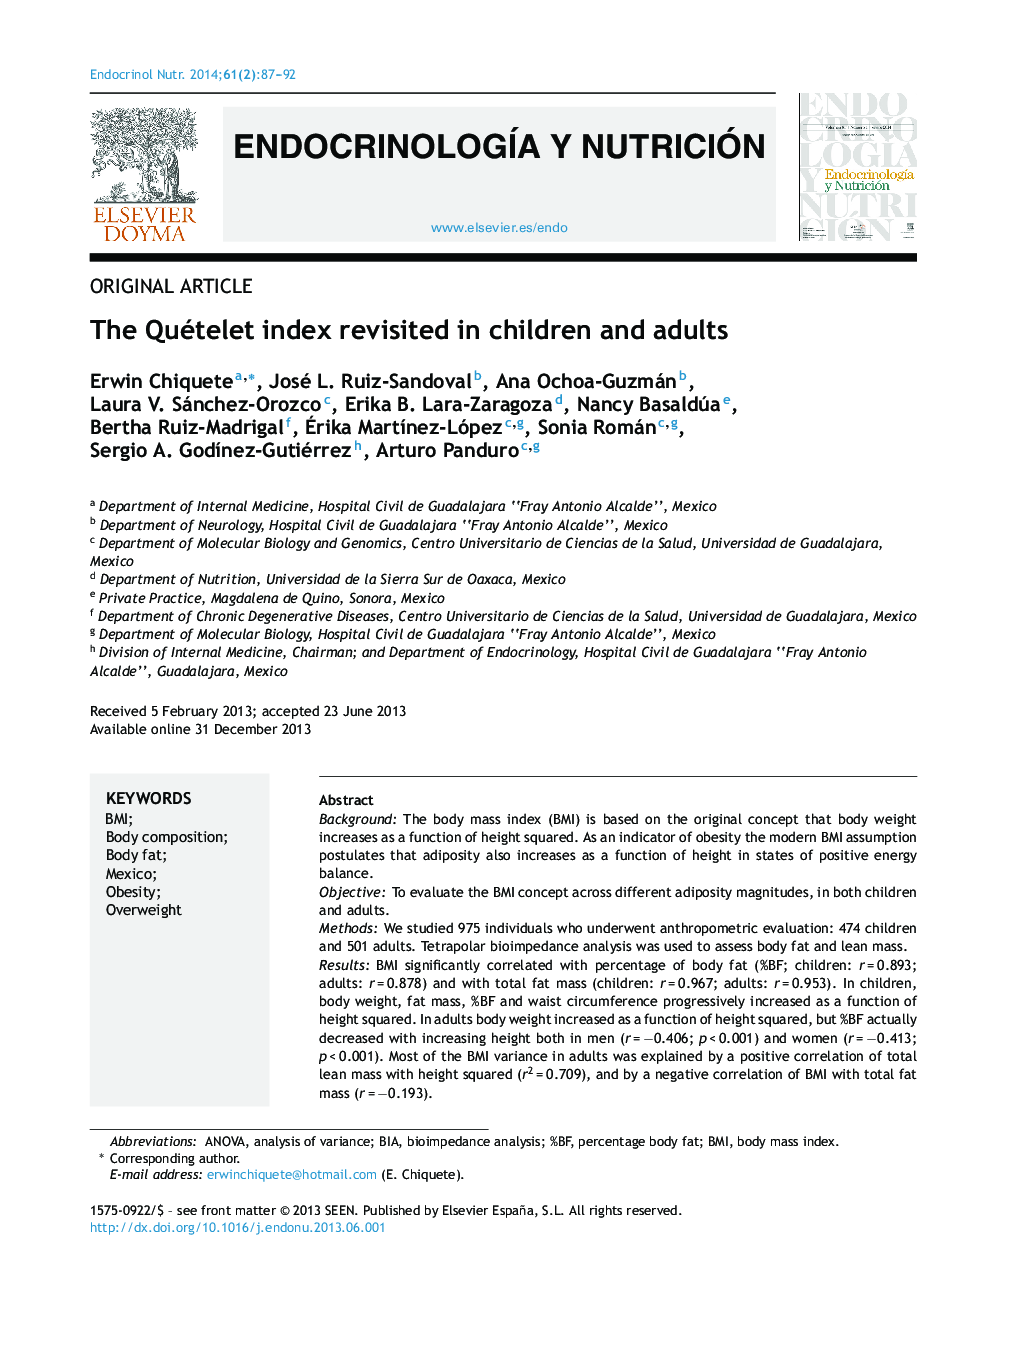 The Quételet index revisited in children and adults